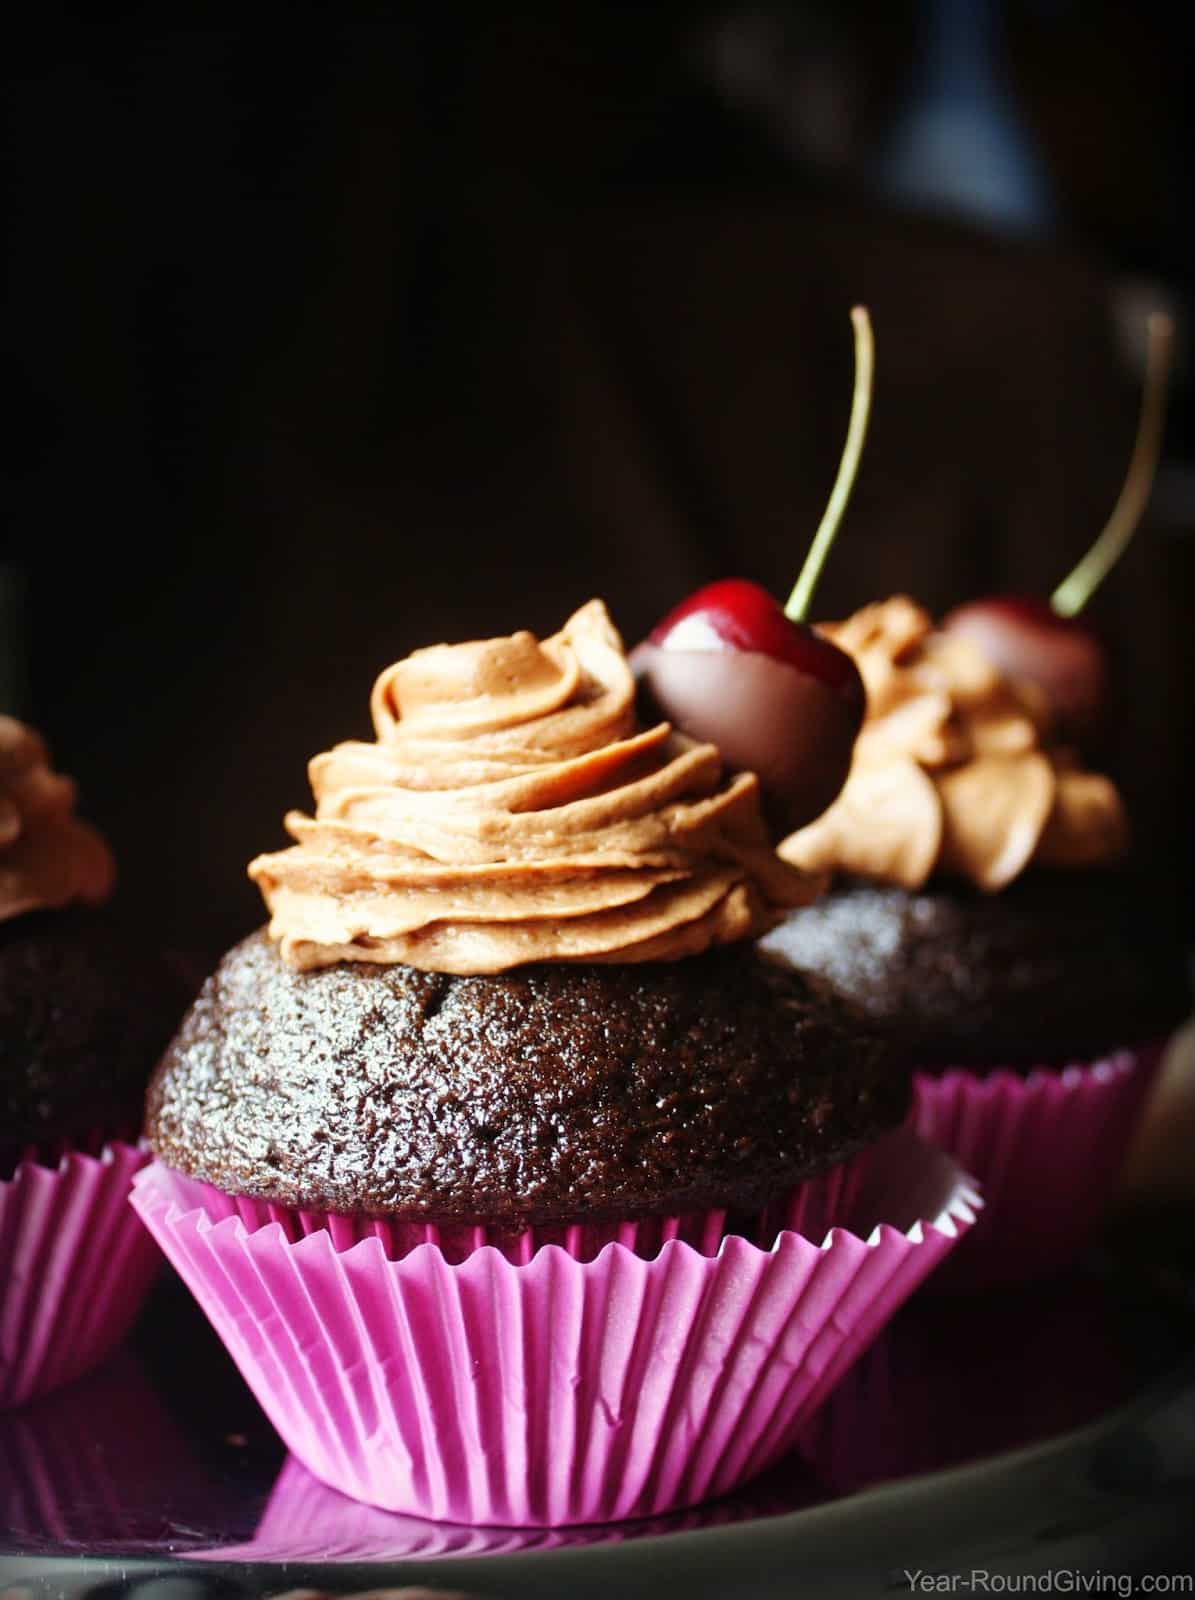 Chocolate Espresso Cupcakes with Chocolate Dipped Cherries